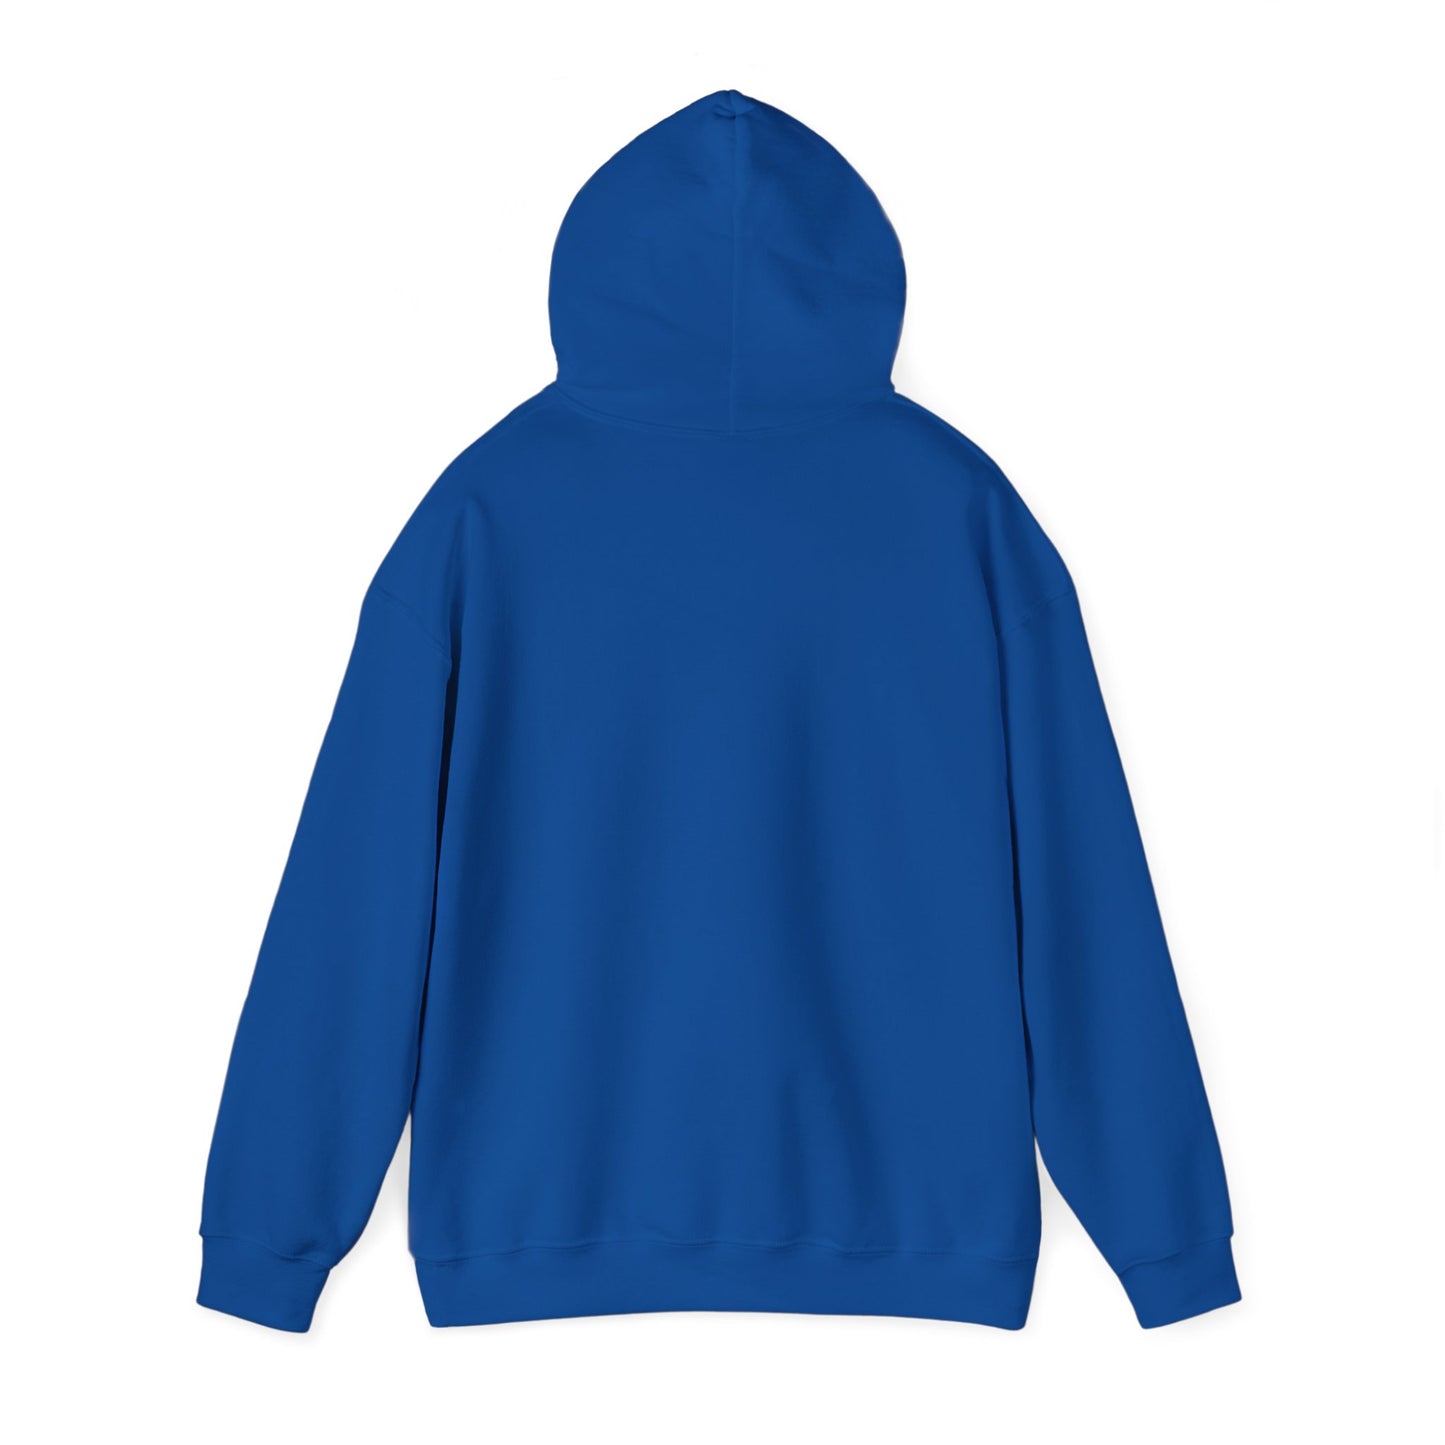 C.P.A. - Hoodies with Credentials for Financial Advisors